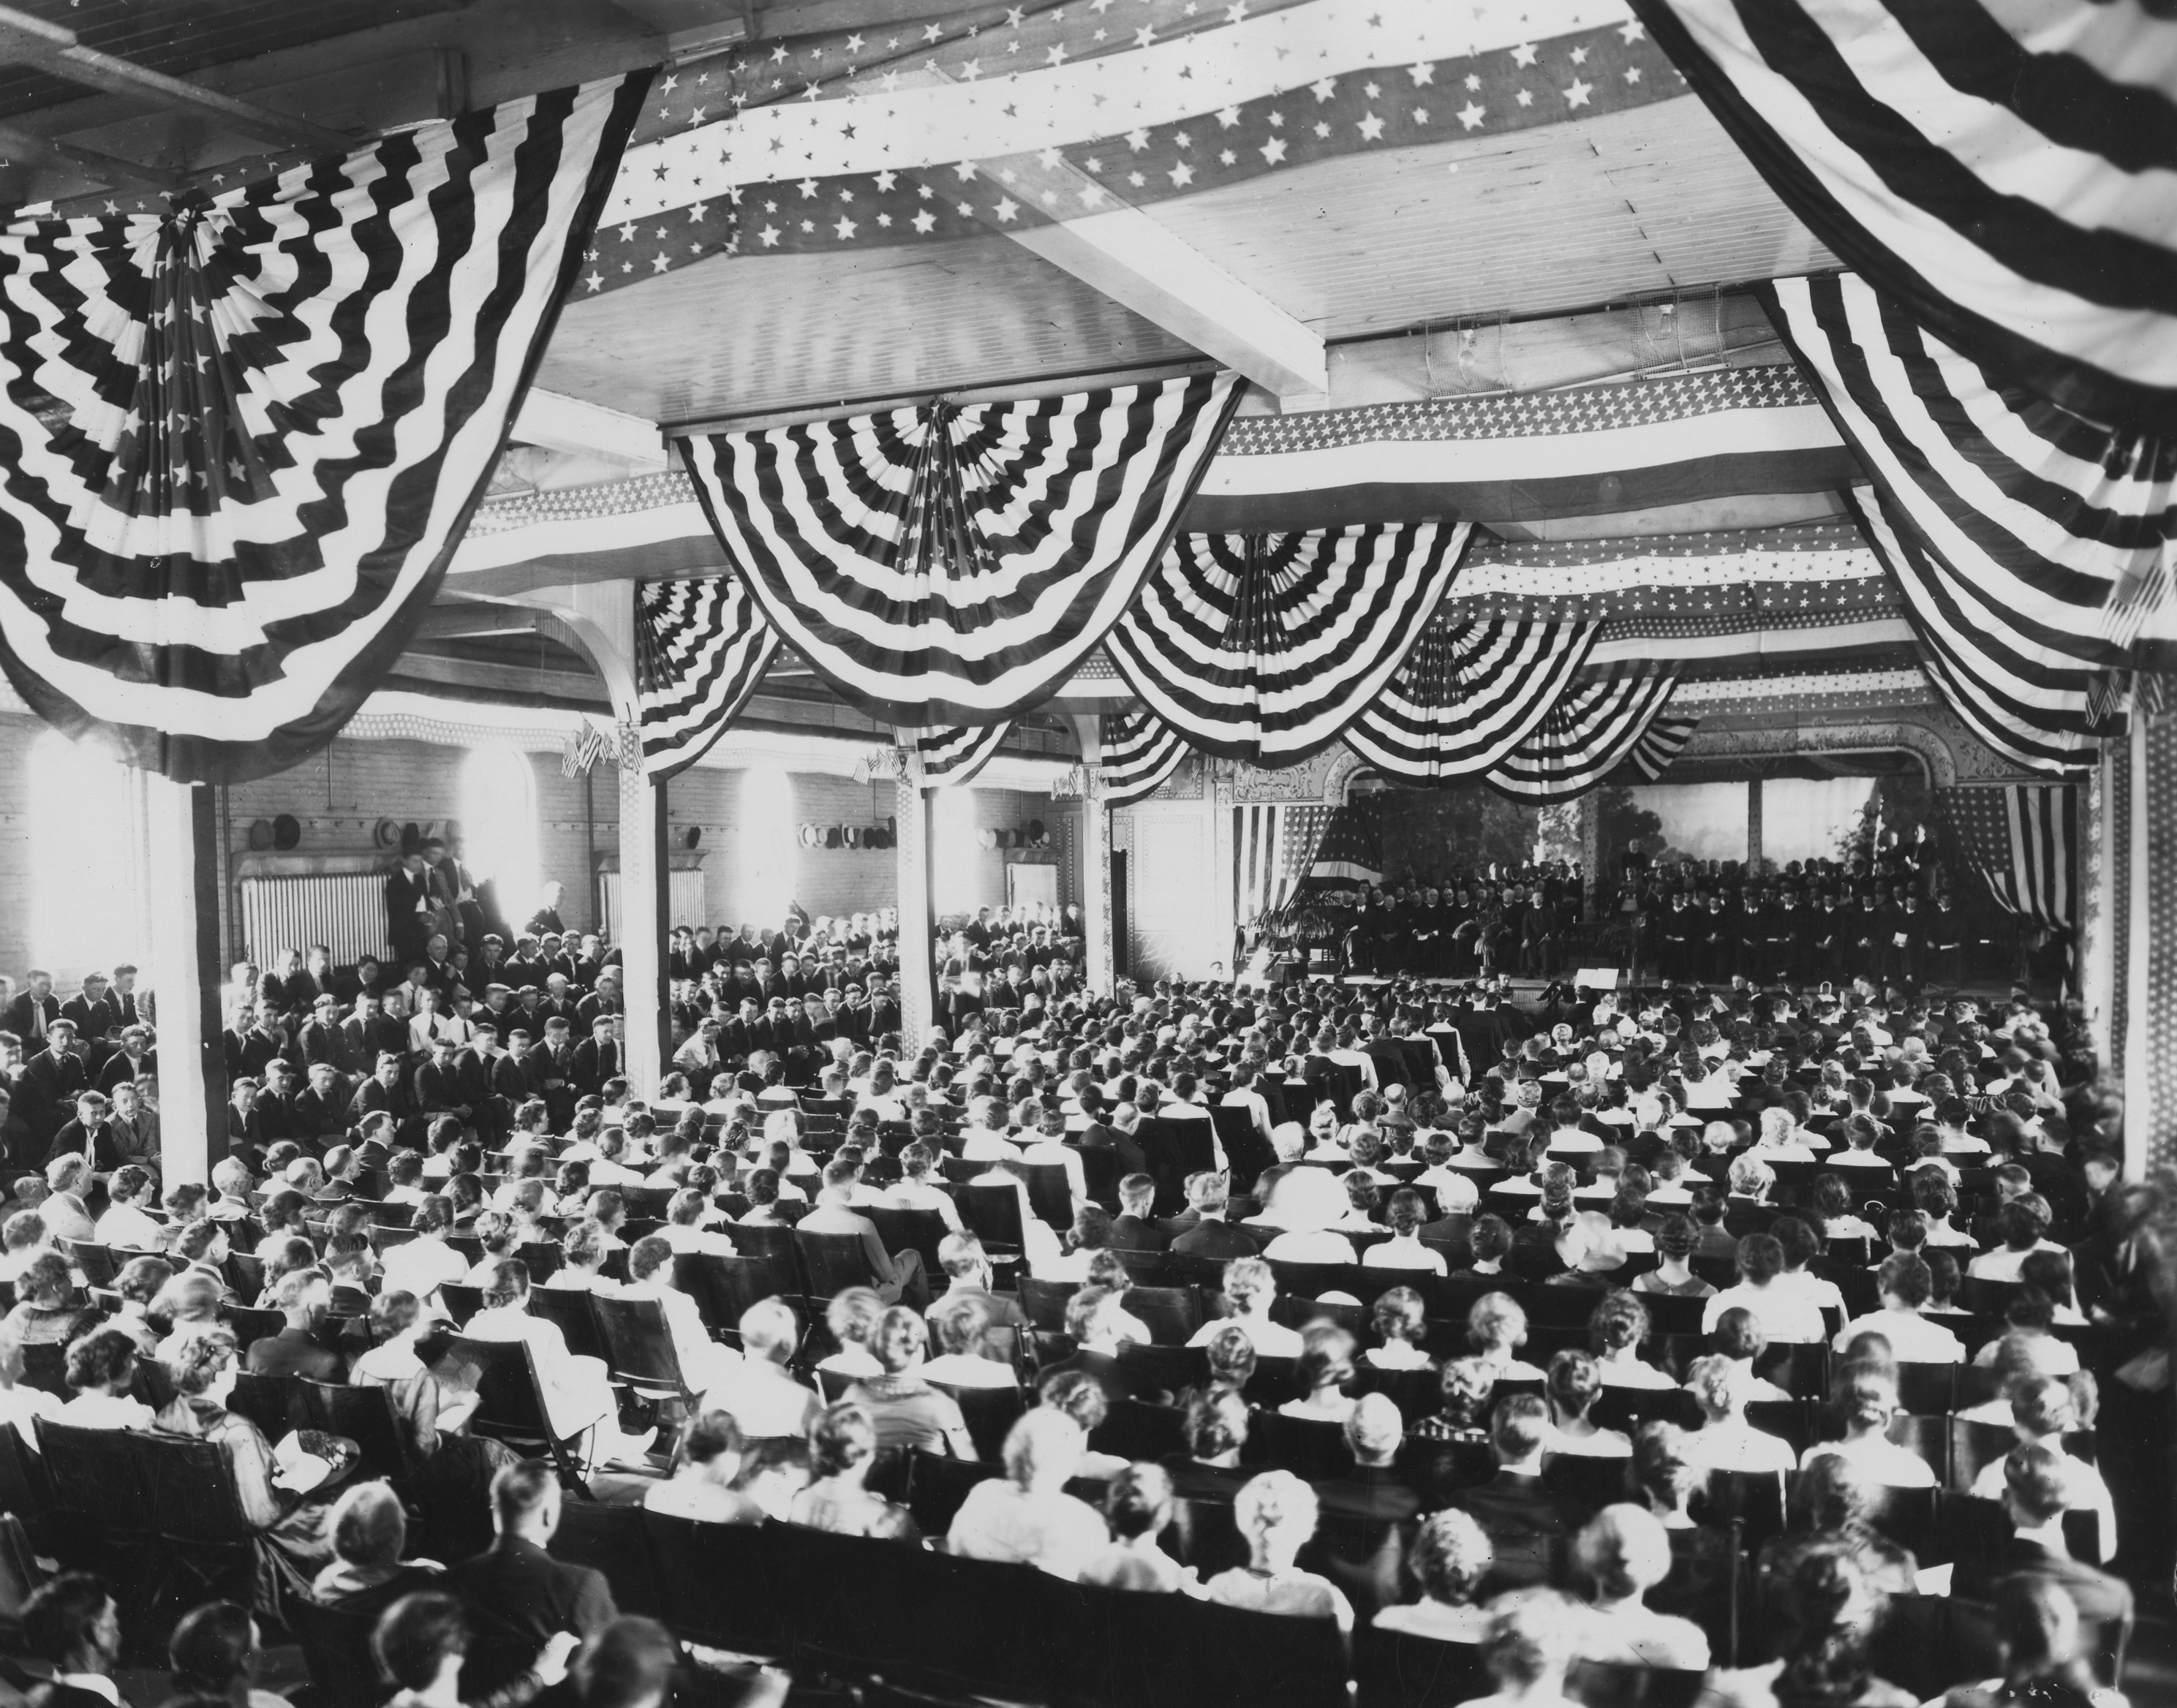 A black and white photo of an assembly inside a building